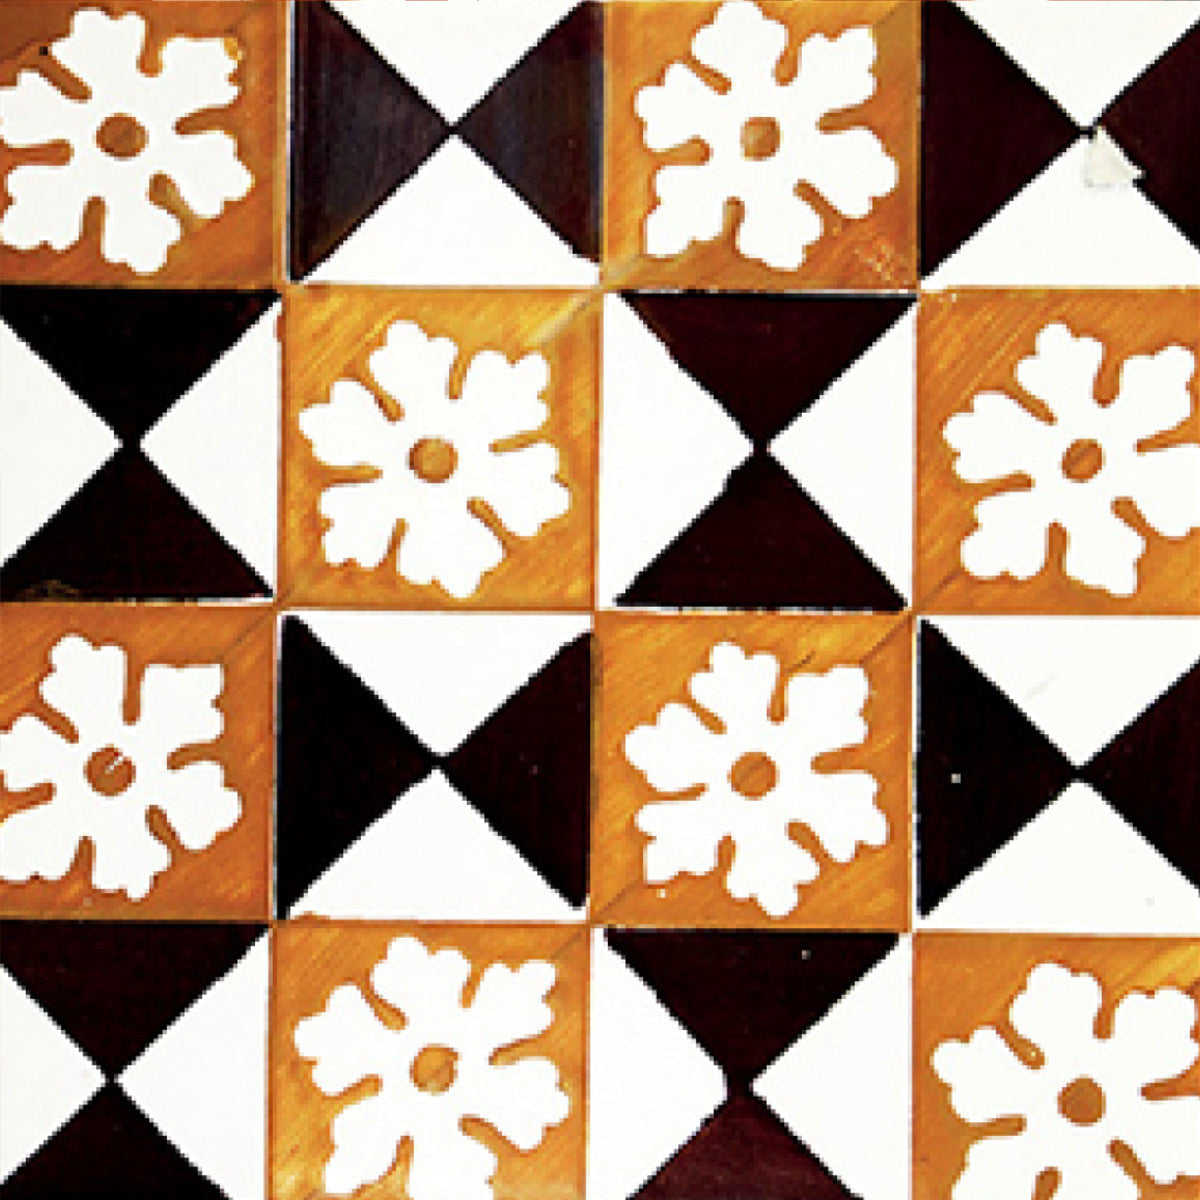 7" x 7" Mini Snowflakes and Squares Peel and Stick Removable Tiles